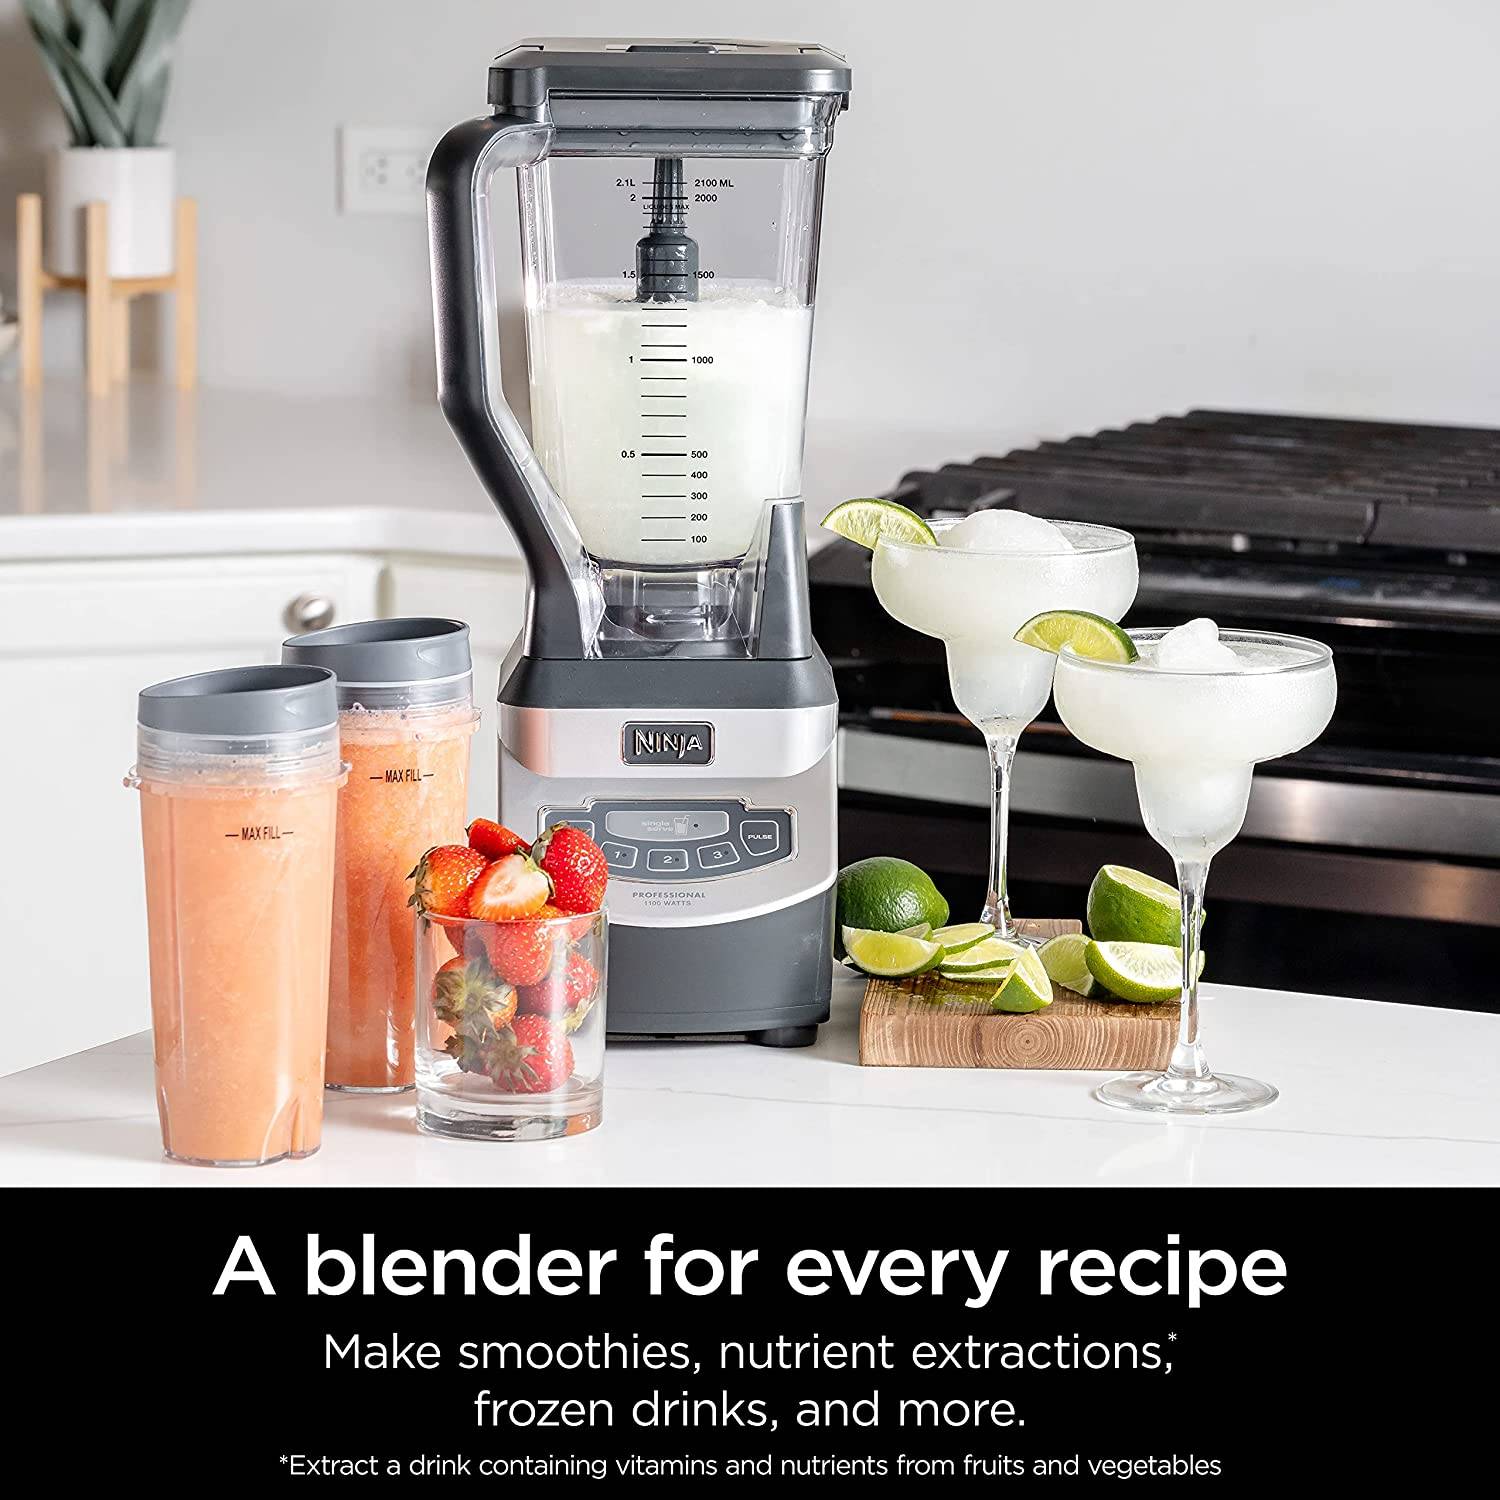 Ninja Professional with Single Serve Cups 3 Speed Blender Silver